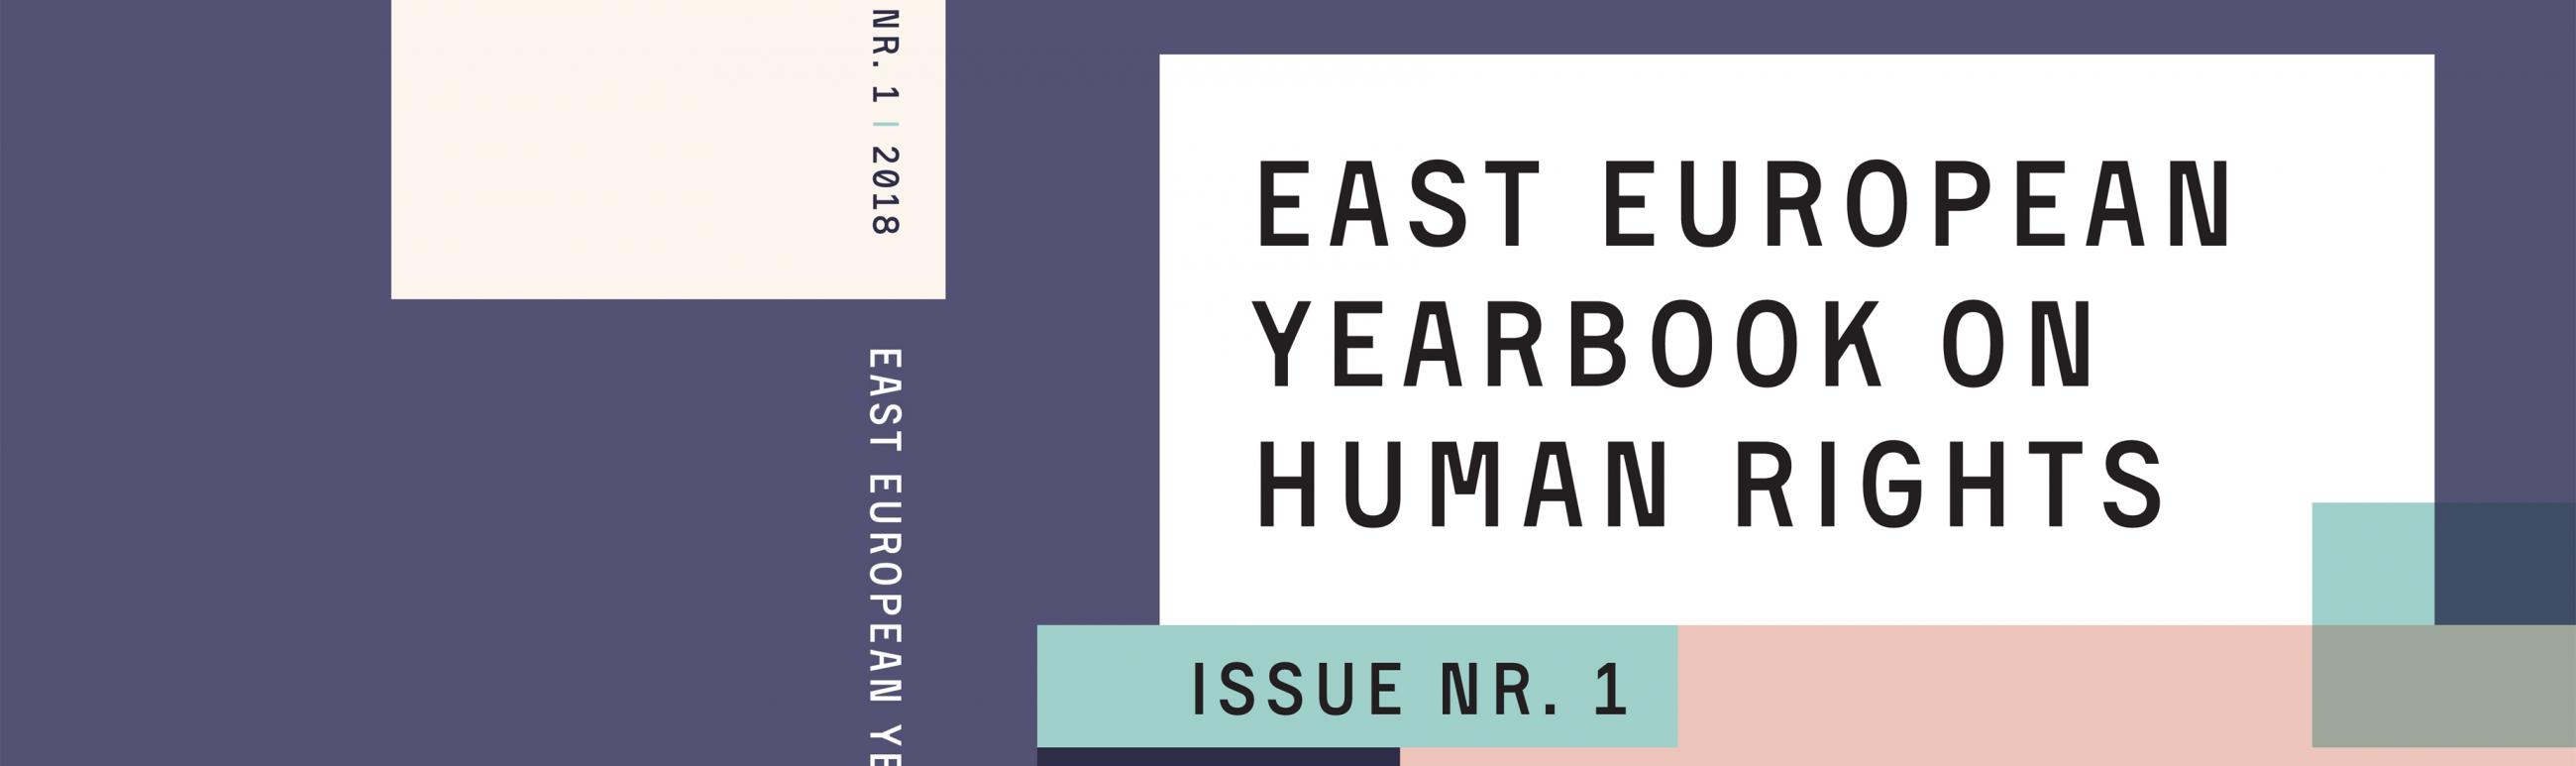 East European Yearbook on Human Rights